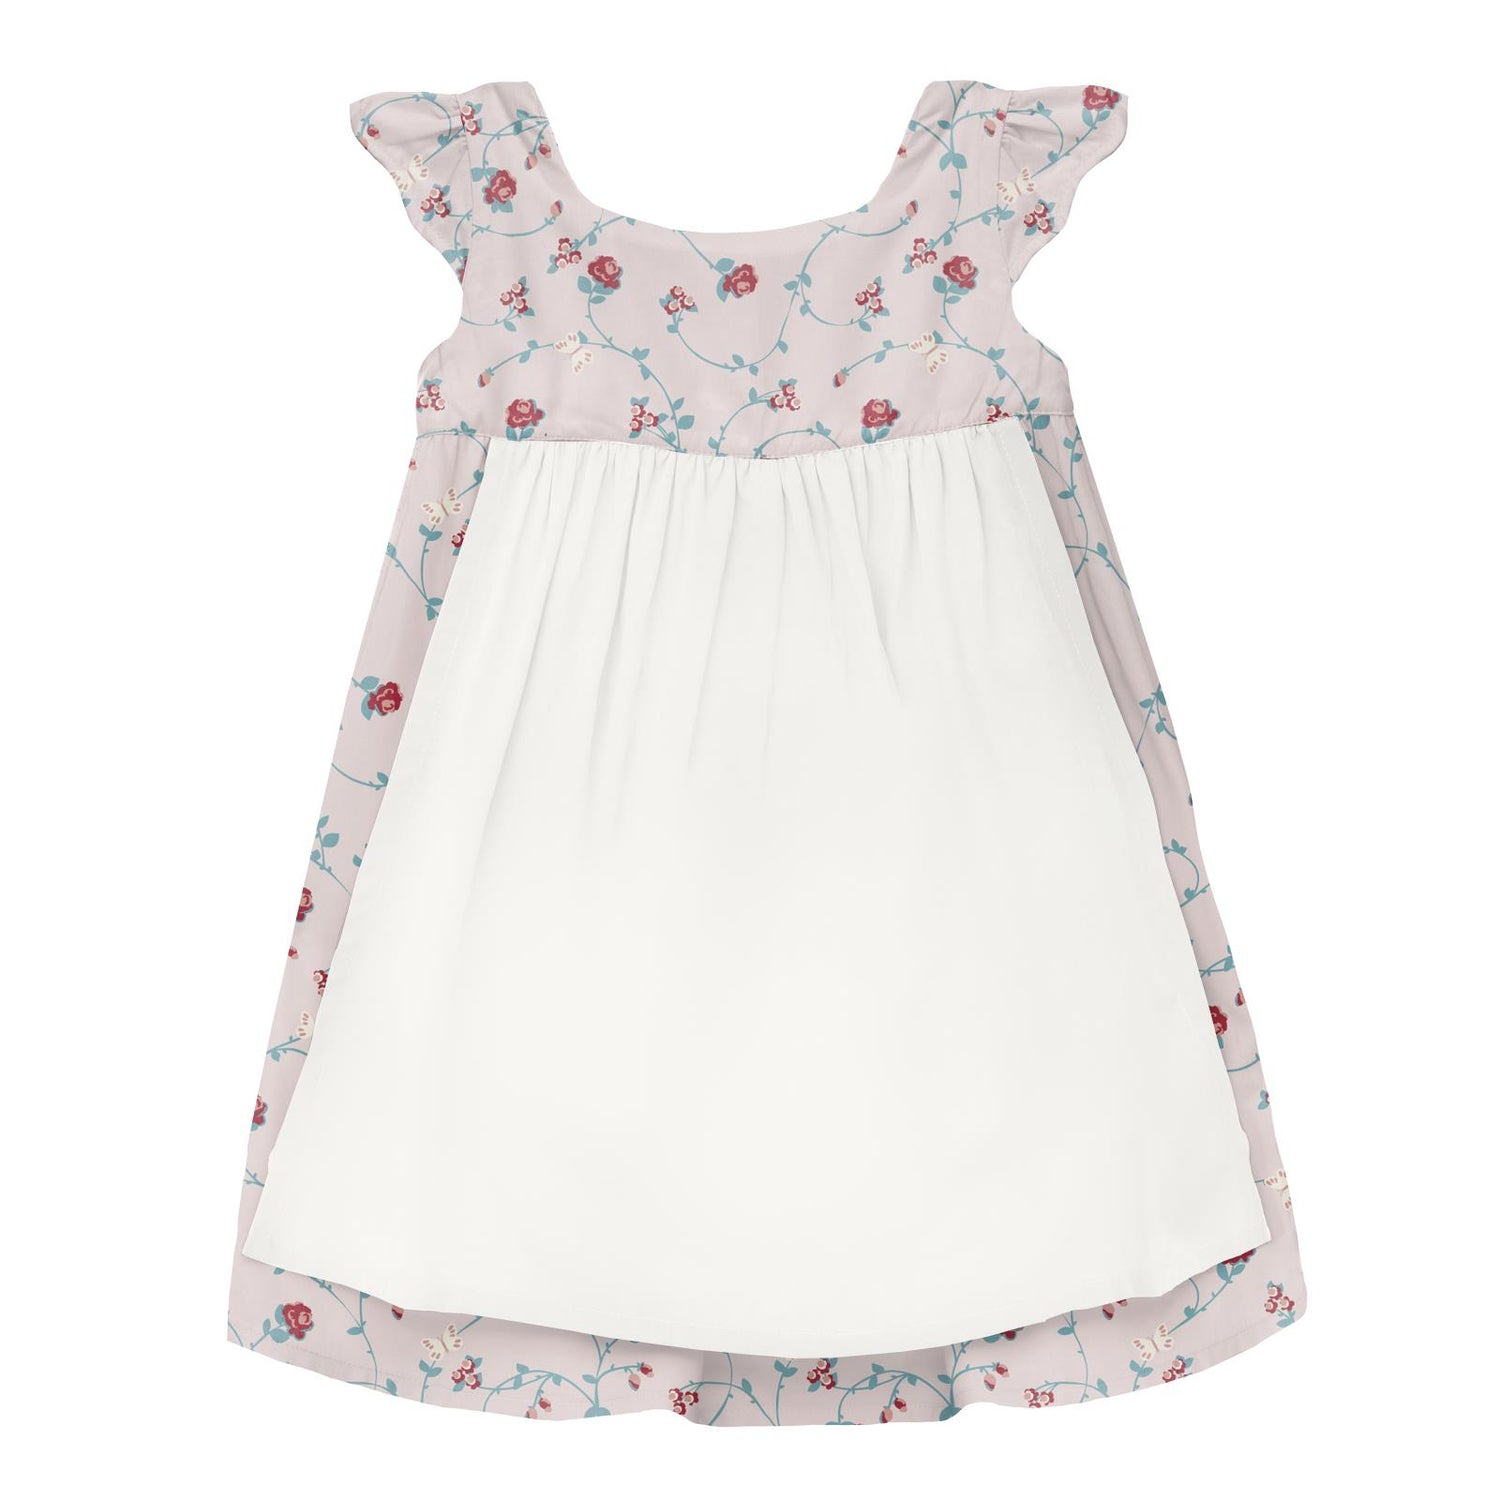 Woven Garden Dress with Apron in Macaroon Floral Vines